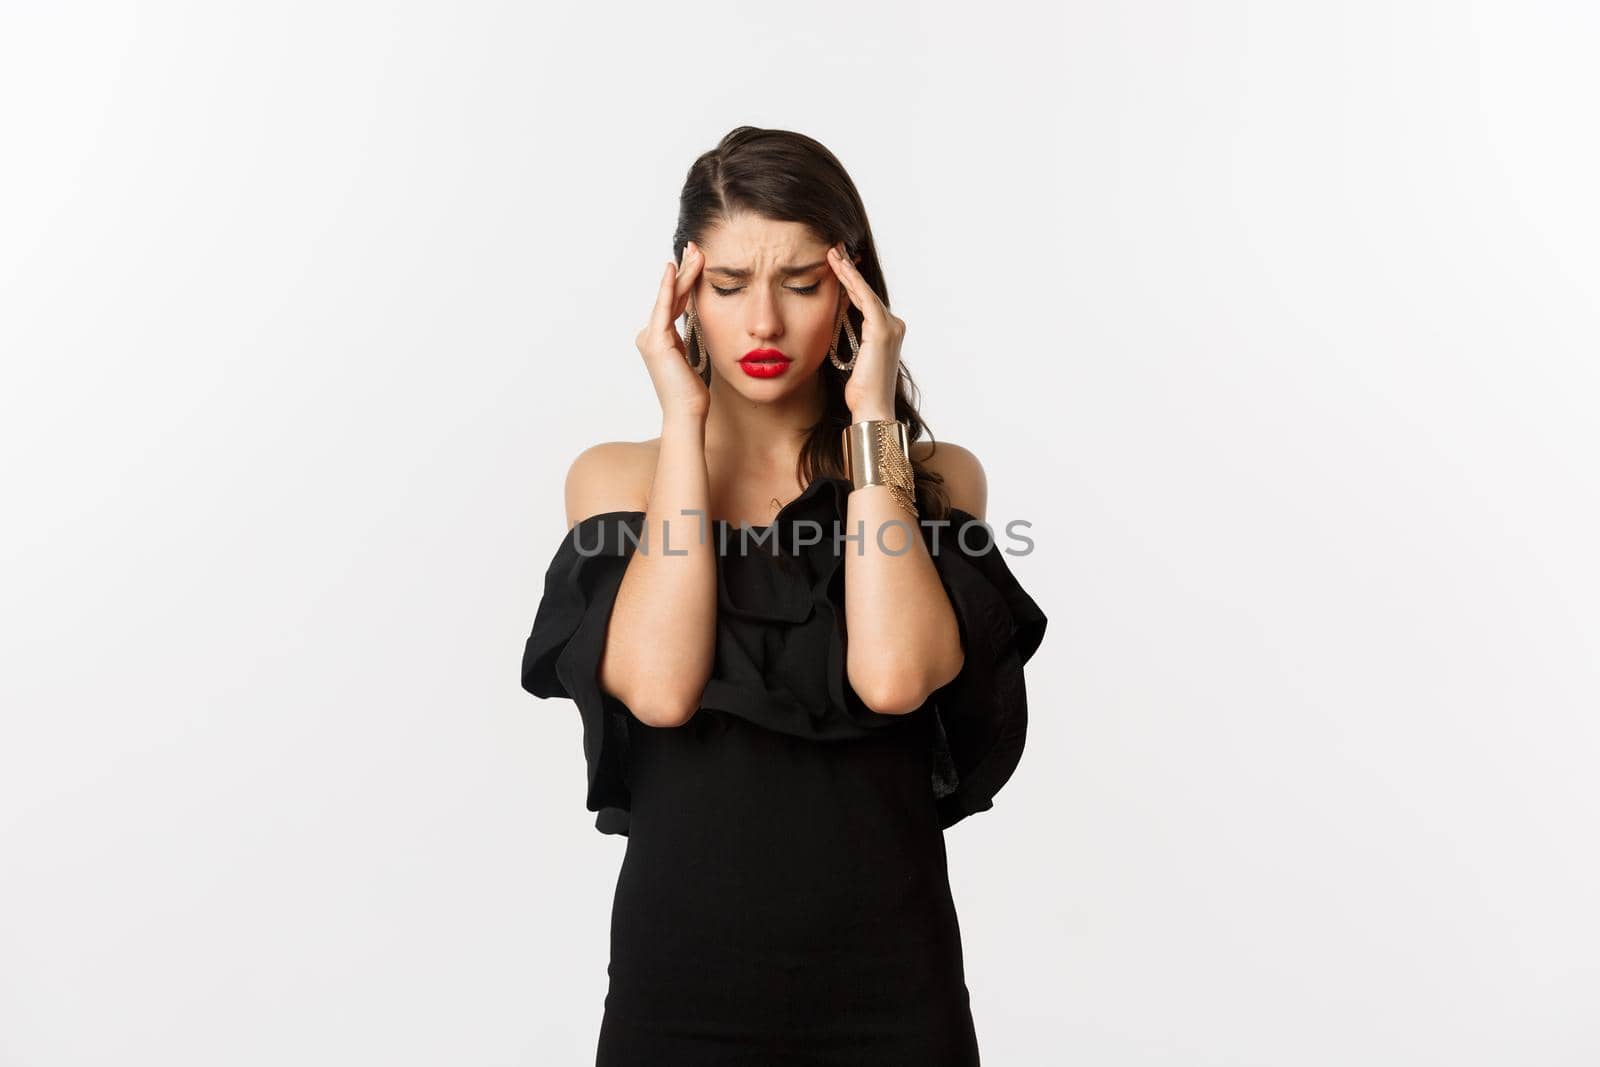 Fashion and beauty. Young modern woman in black dress, red lipstick, having headache, touching head and feeling sick, standing over white background.